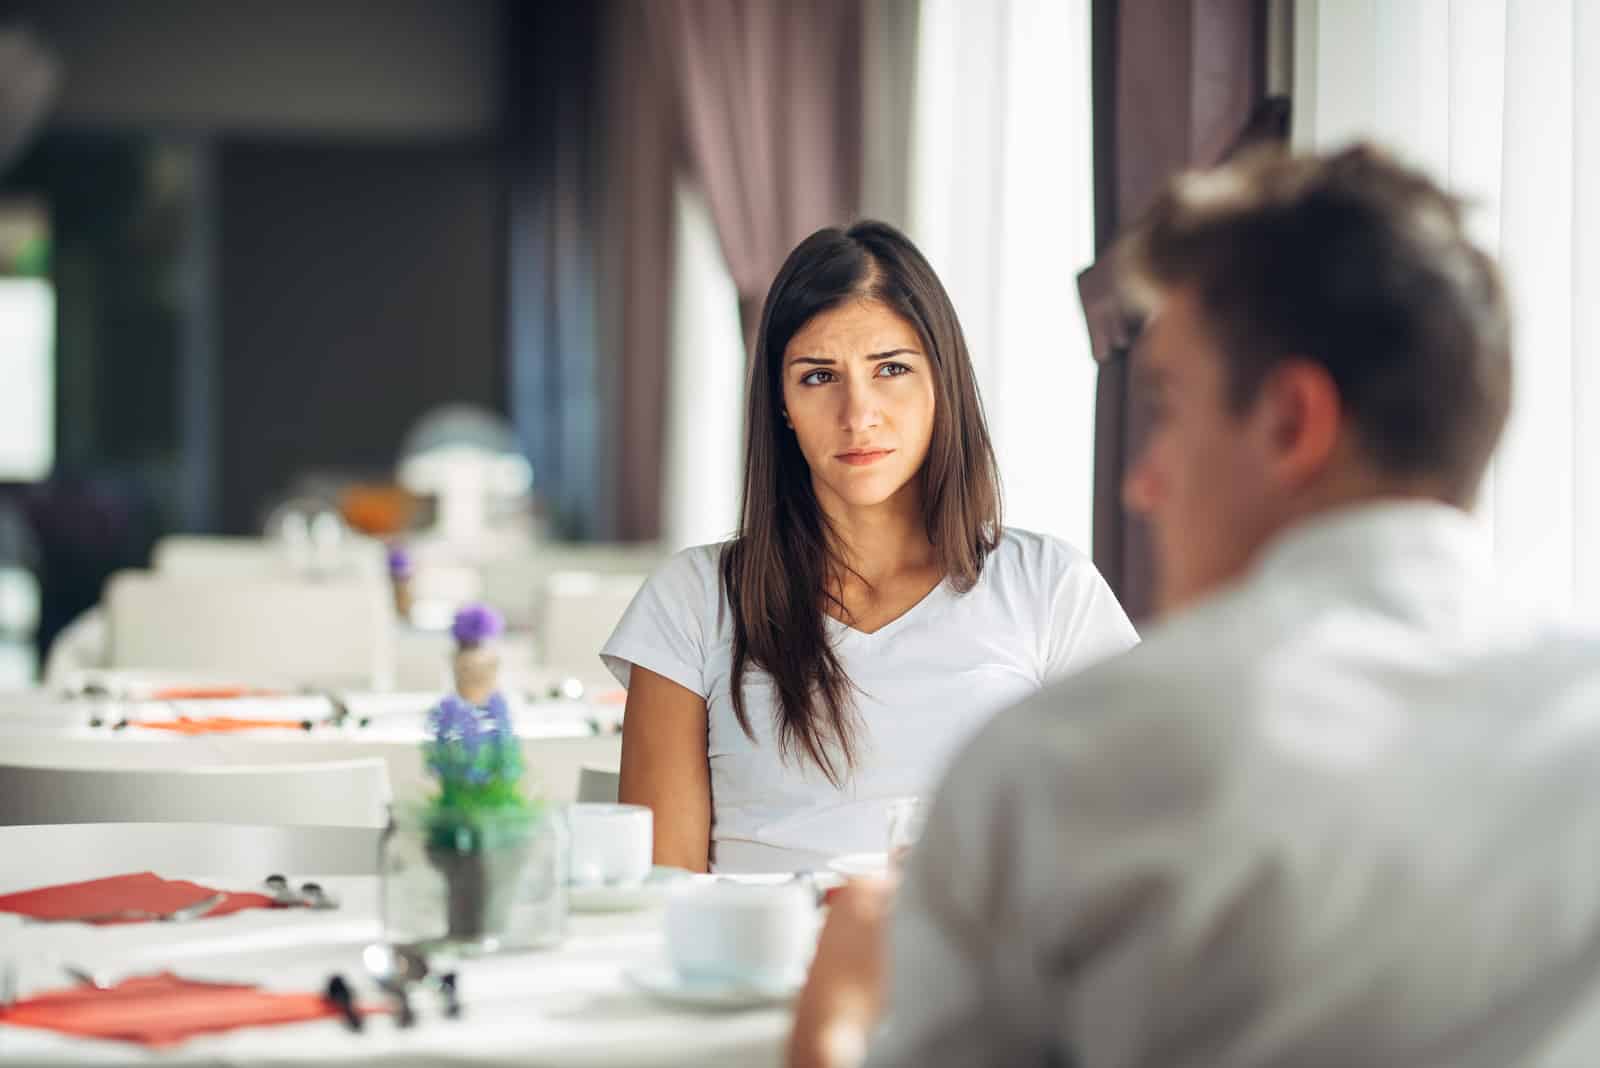 man looking away while on date